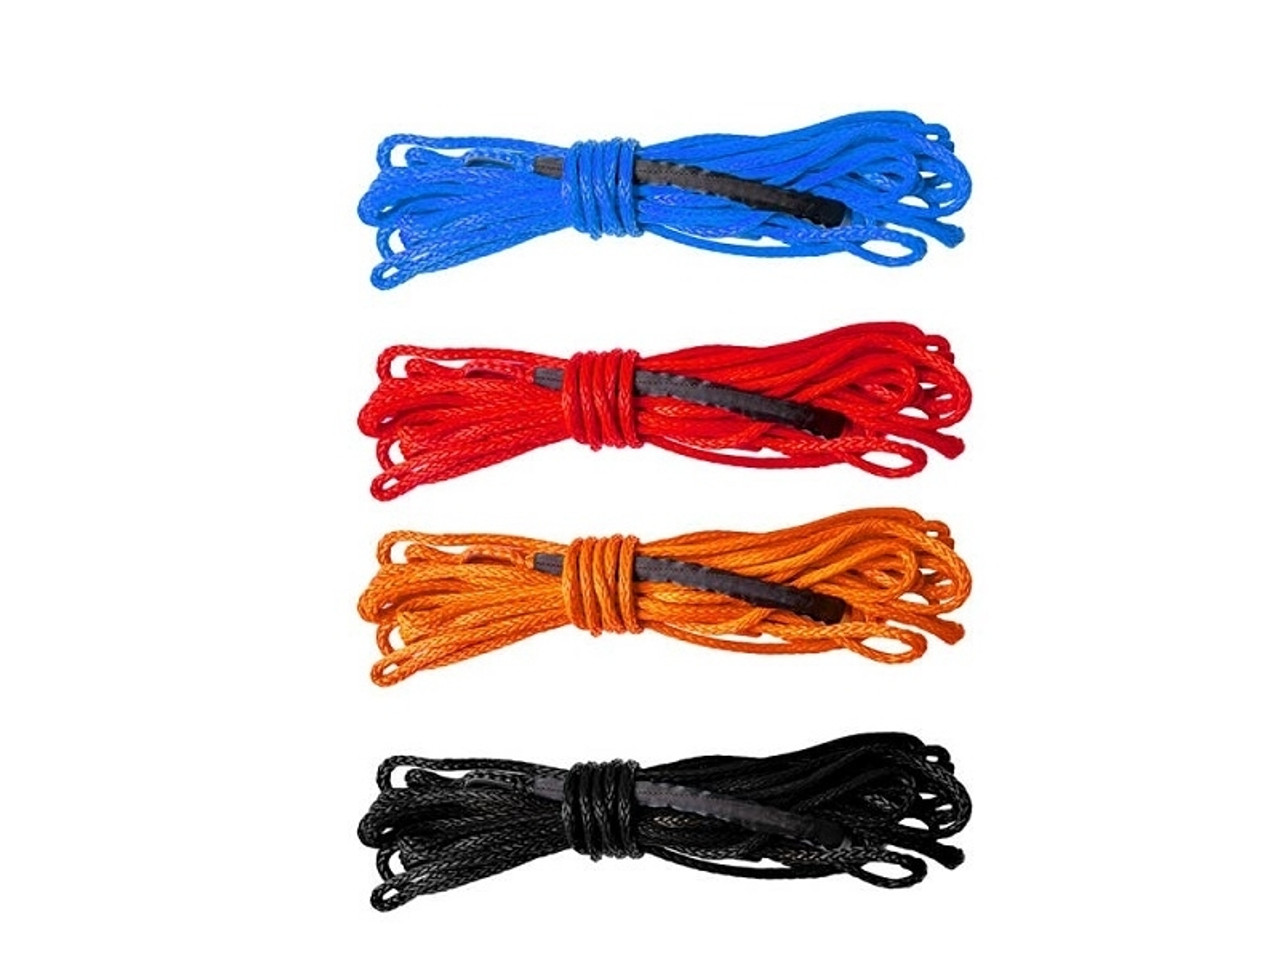 https://cdn11.bigcommerce.com/s-ujwiolvr5o/images/stencil/1280x1280/products/191/784/winch_ropes_3_1_1__33809.1663092504.jpg?c=1